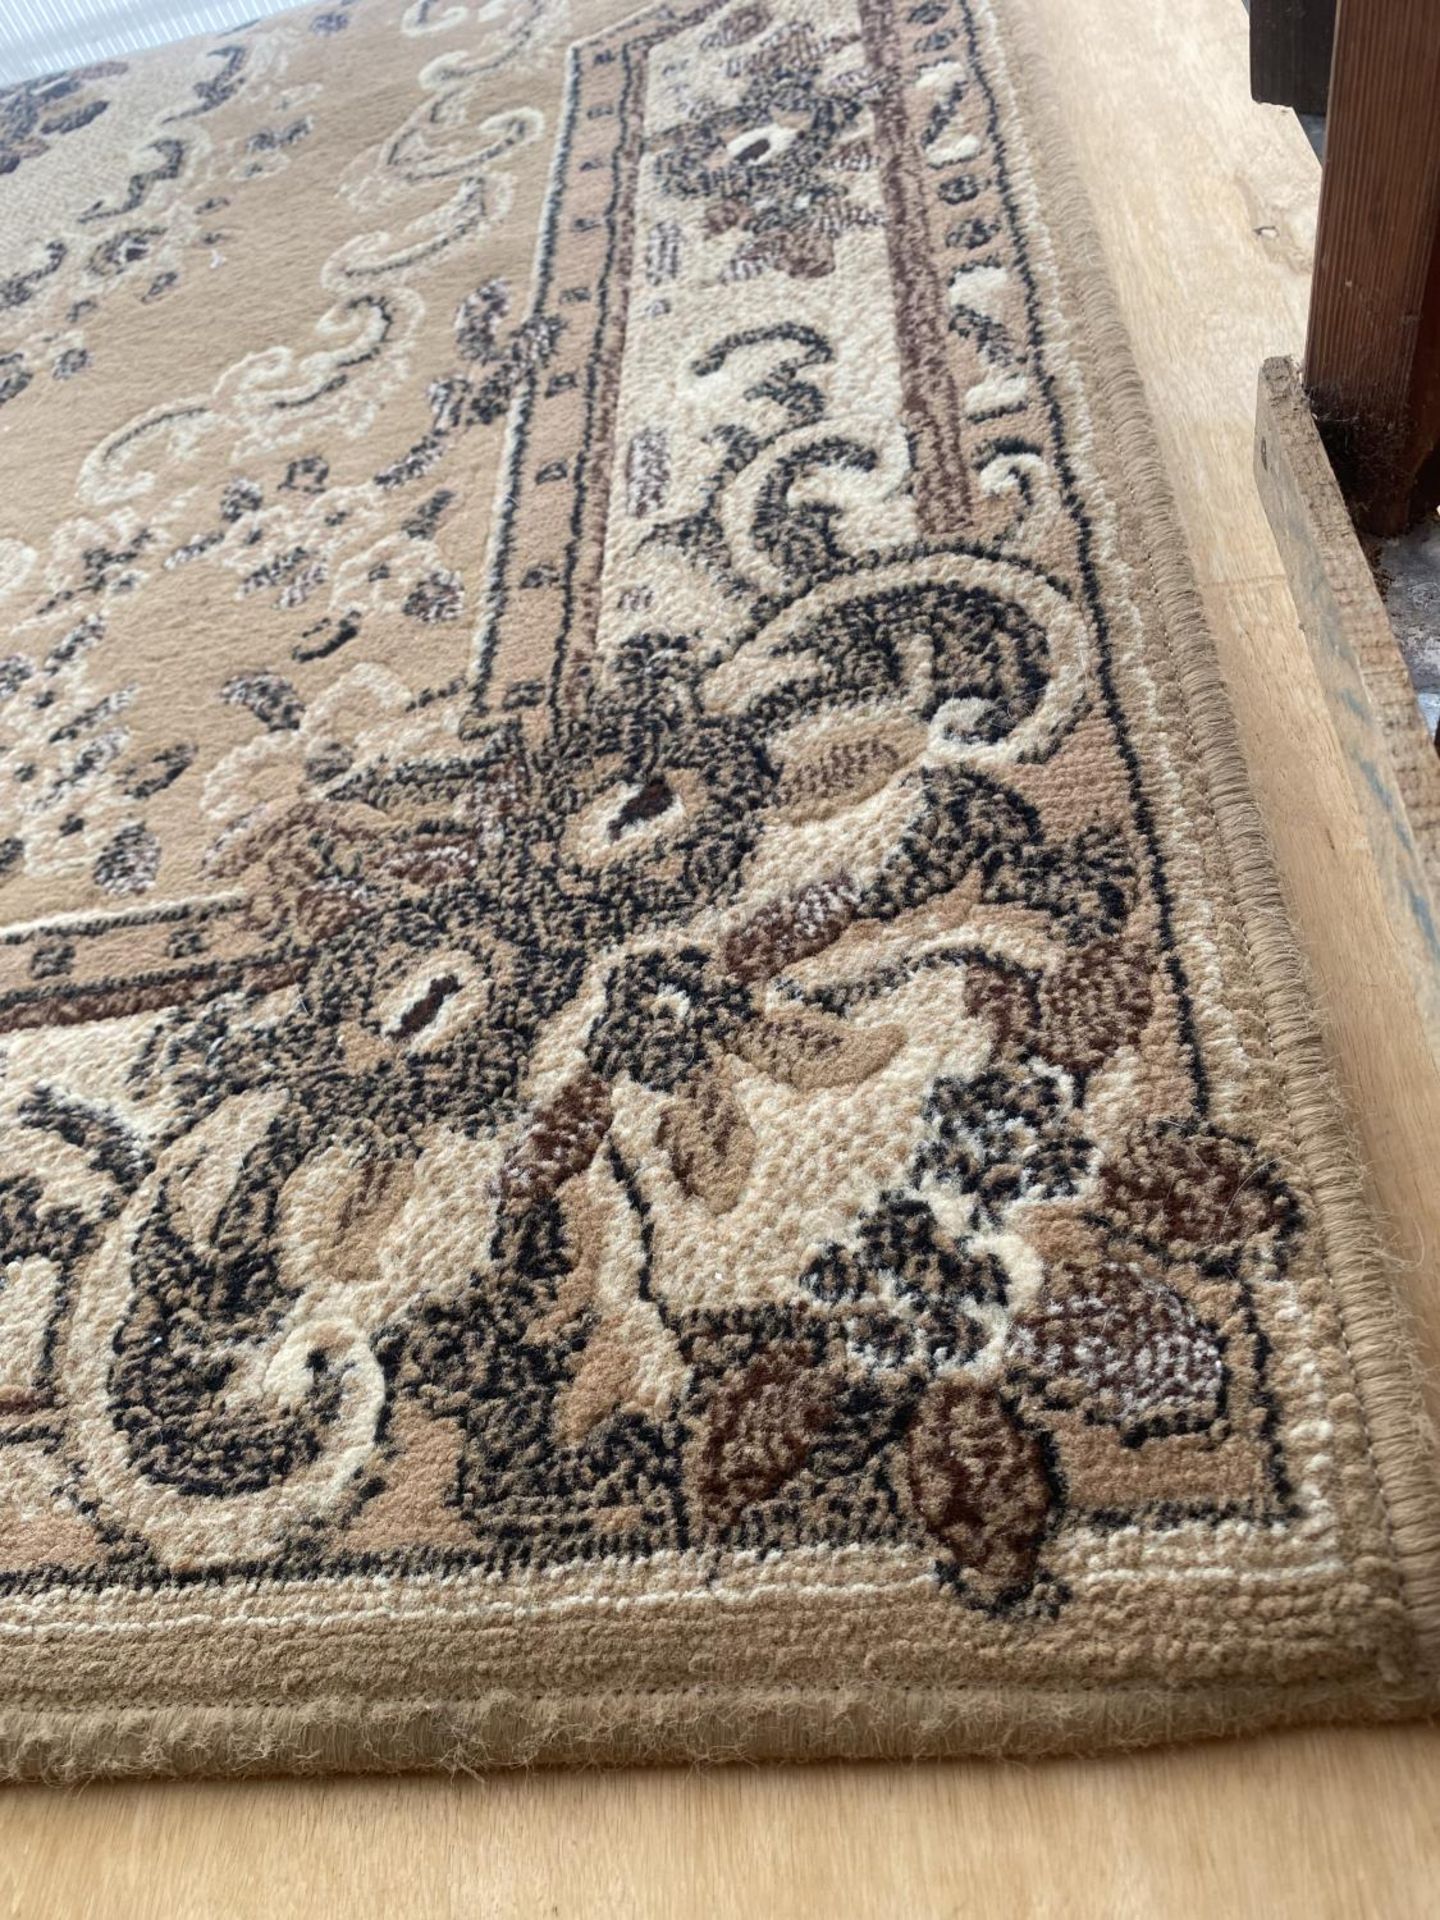 A CREAM PATTERNED RUG - Image 2 of 3